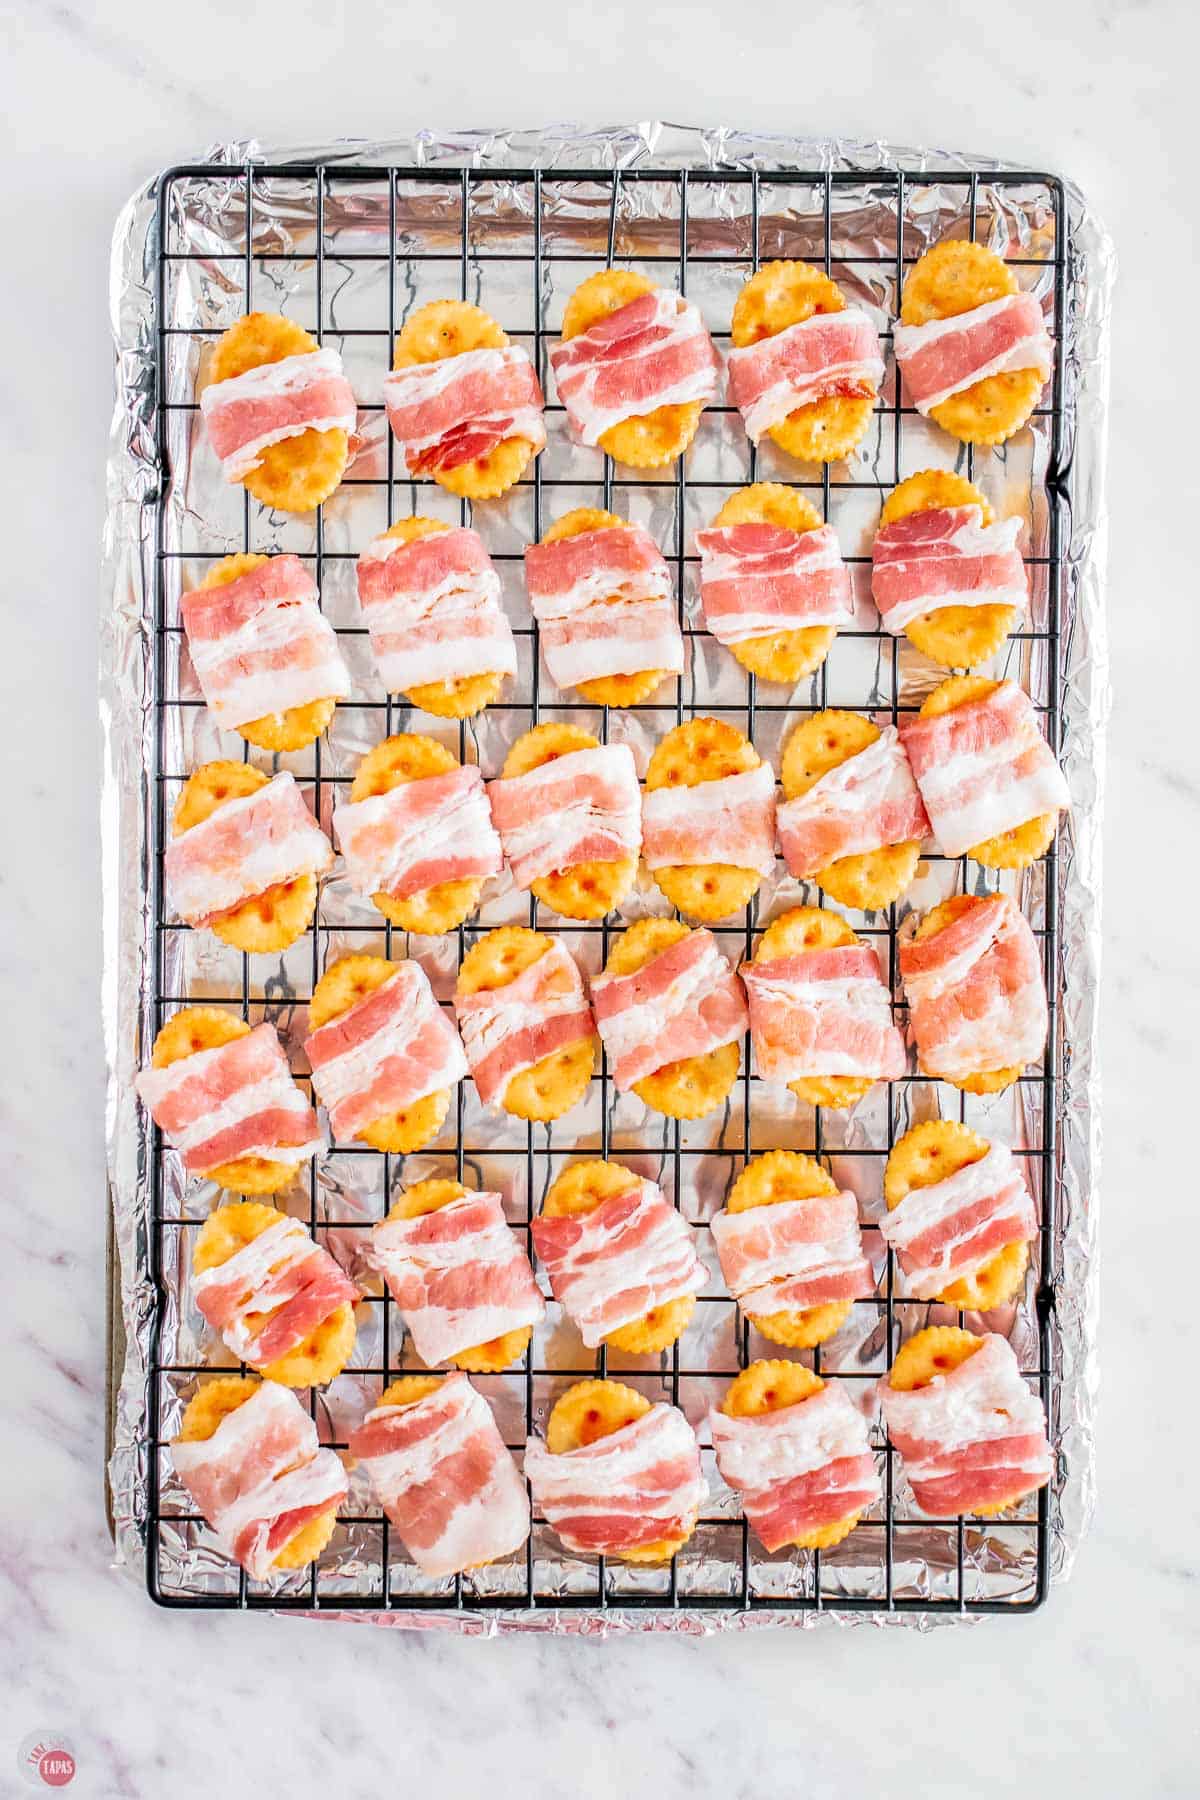 place bacon around the crackers